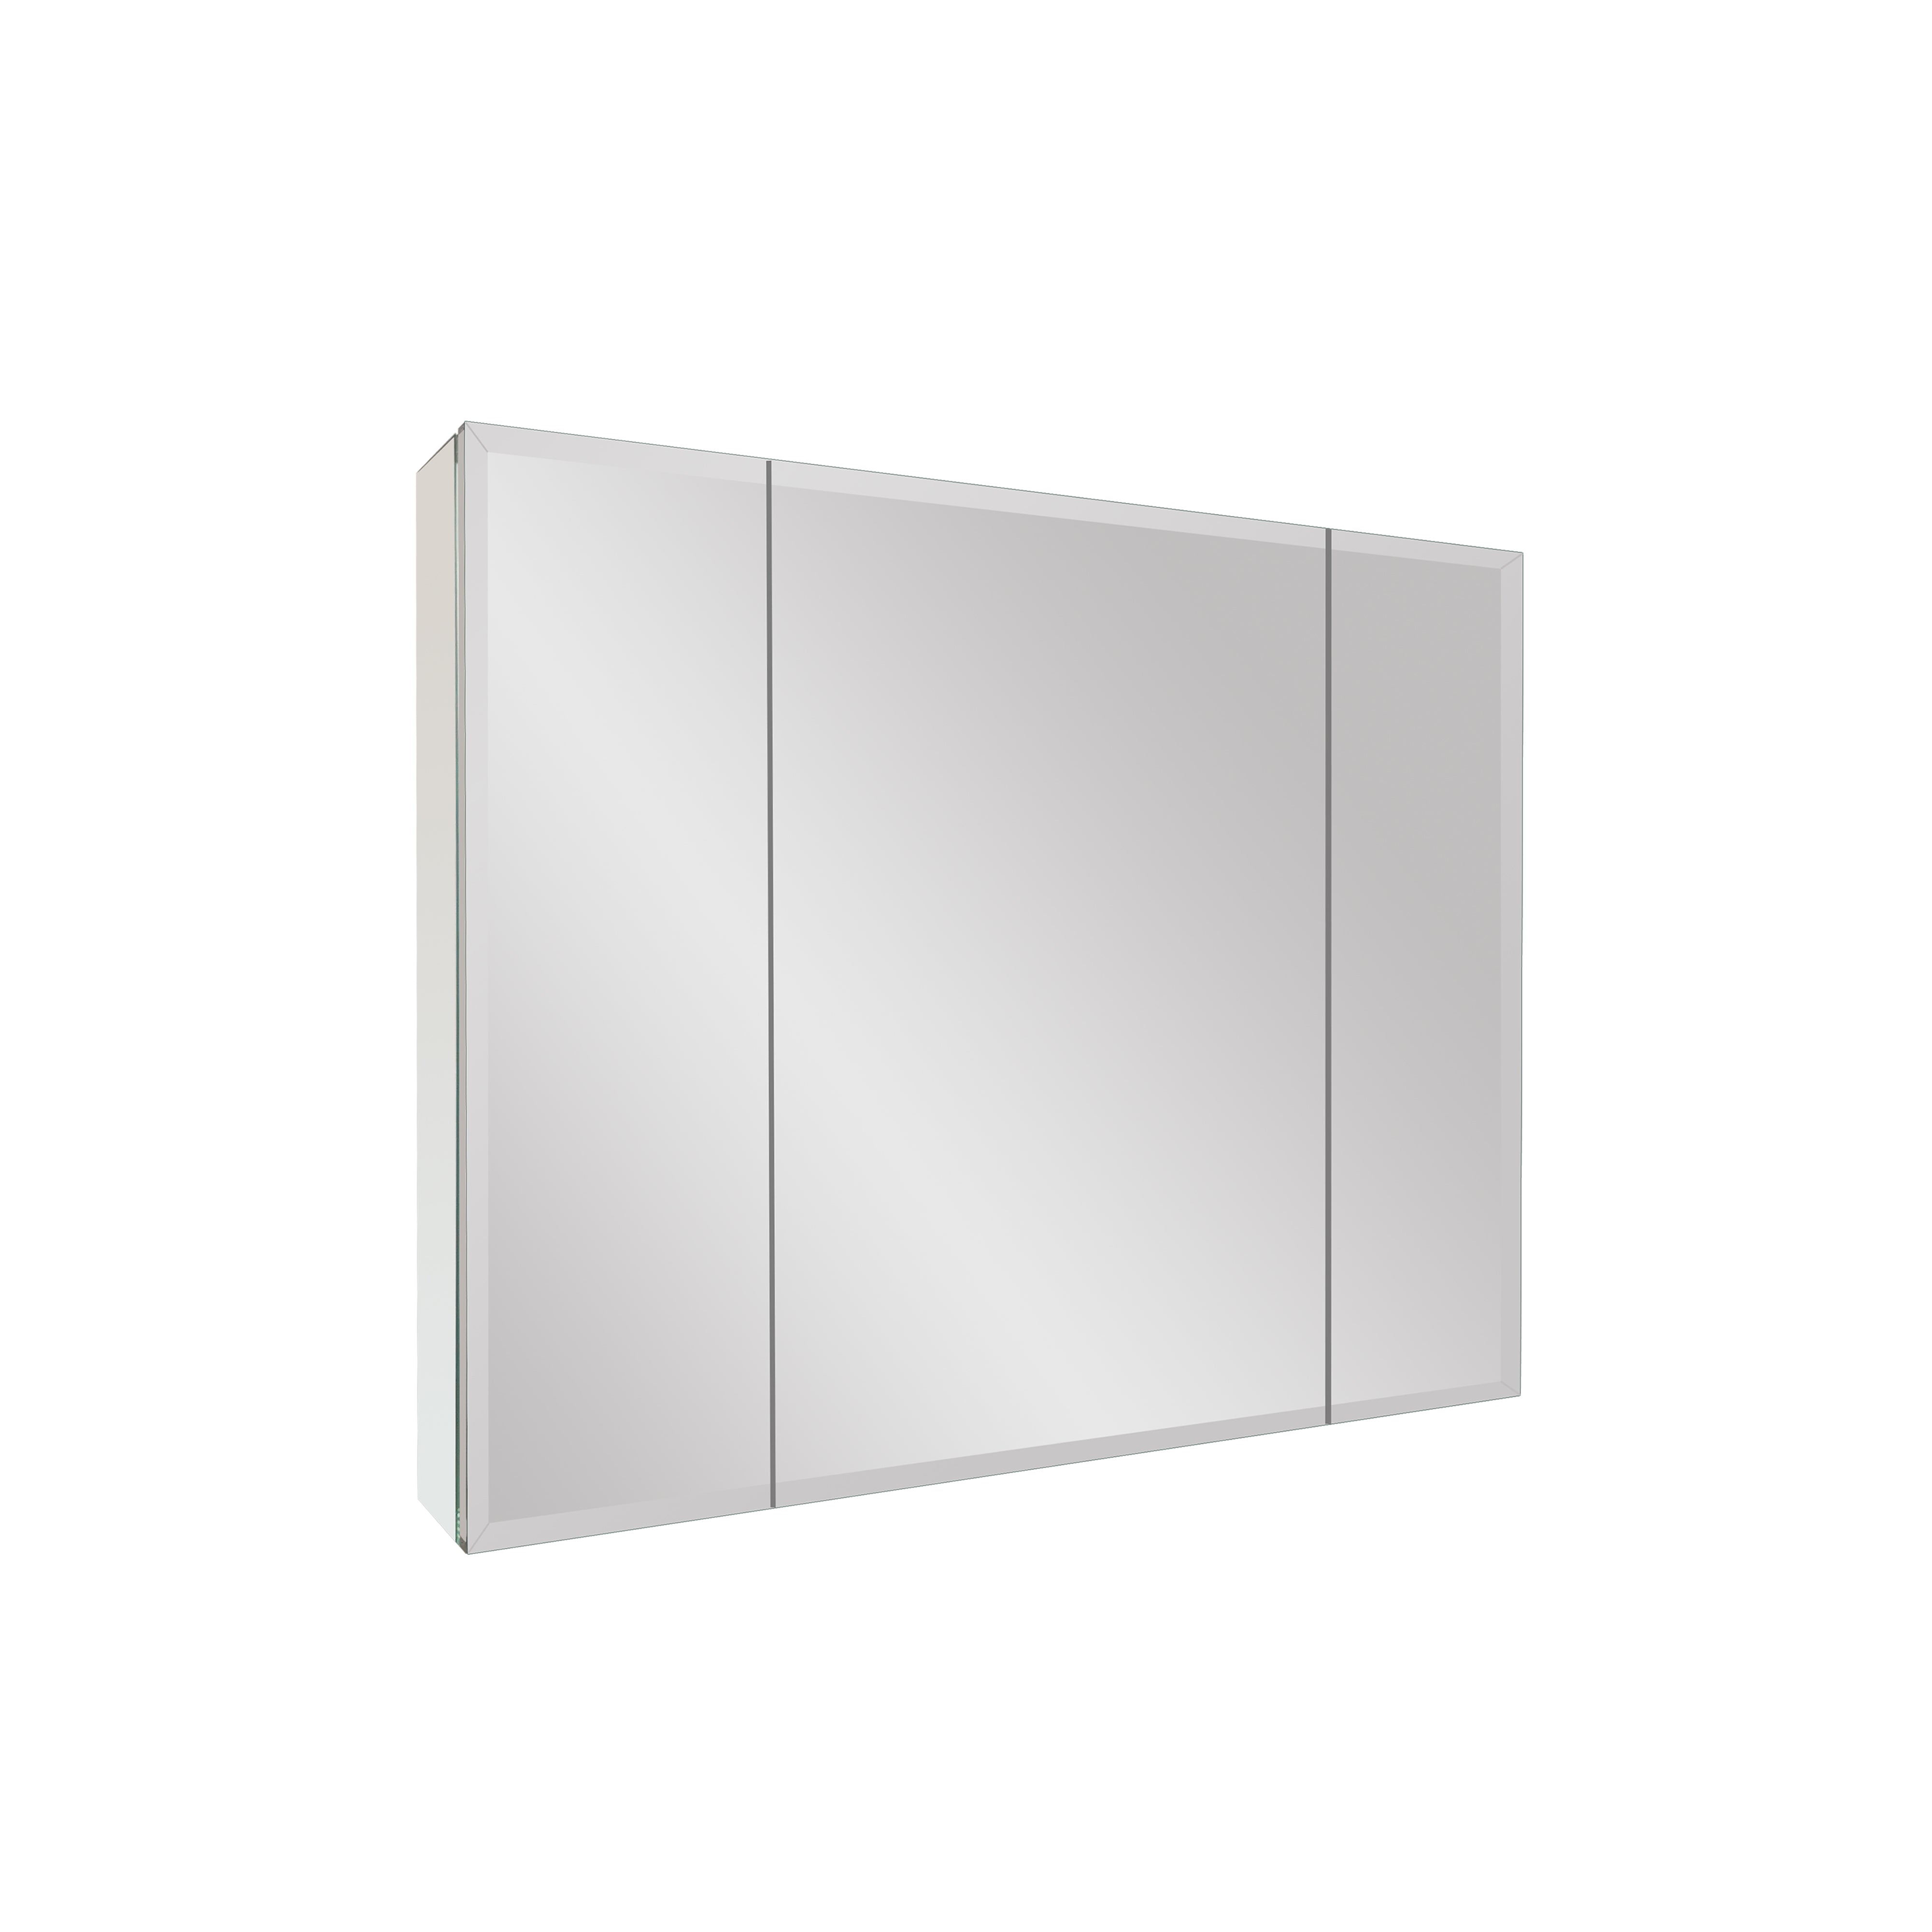 Maximize Your Storage Space with our Aluminum and Silver 36x26 Inch Medicine Mirror Cabinet - Available in 2 and 3 Door Options - Eco LED Lightings 